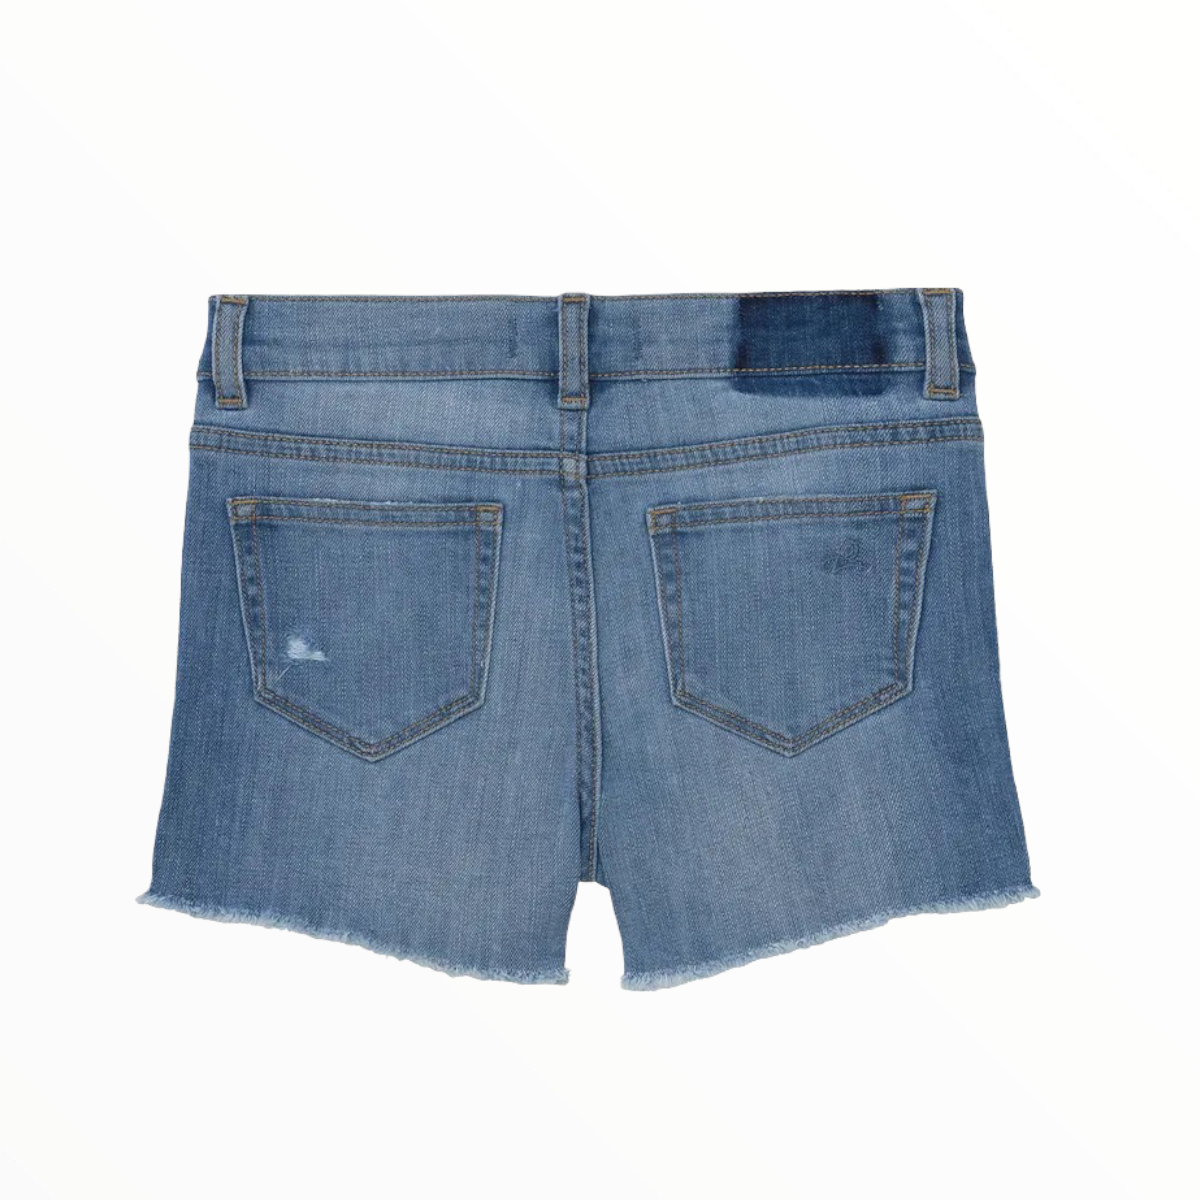 DL1961 LUCY SHORT - FROST DISTRESSED